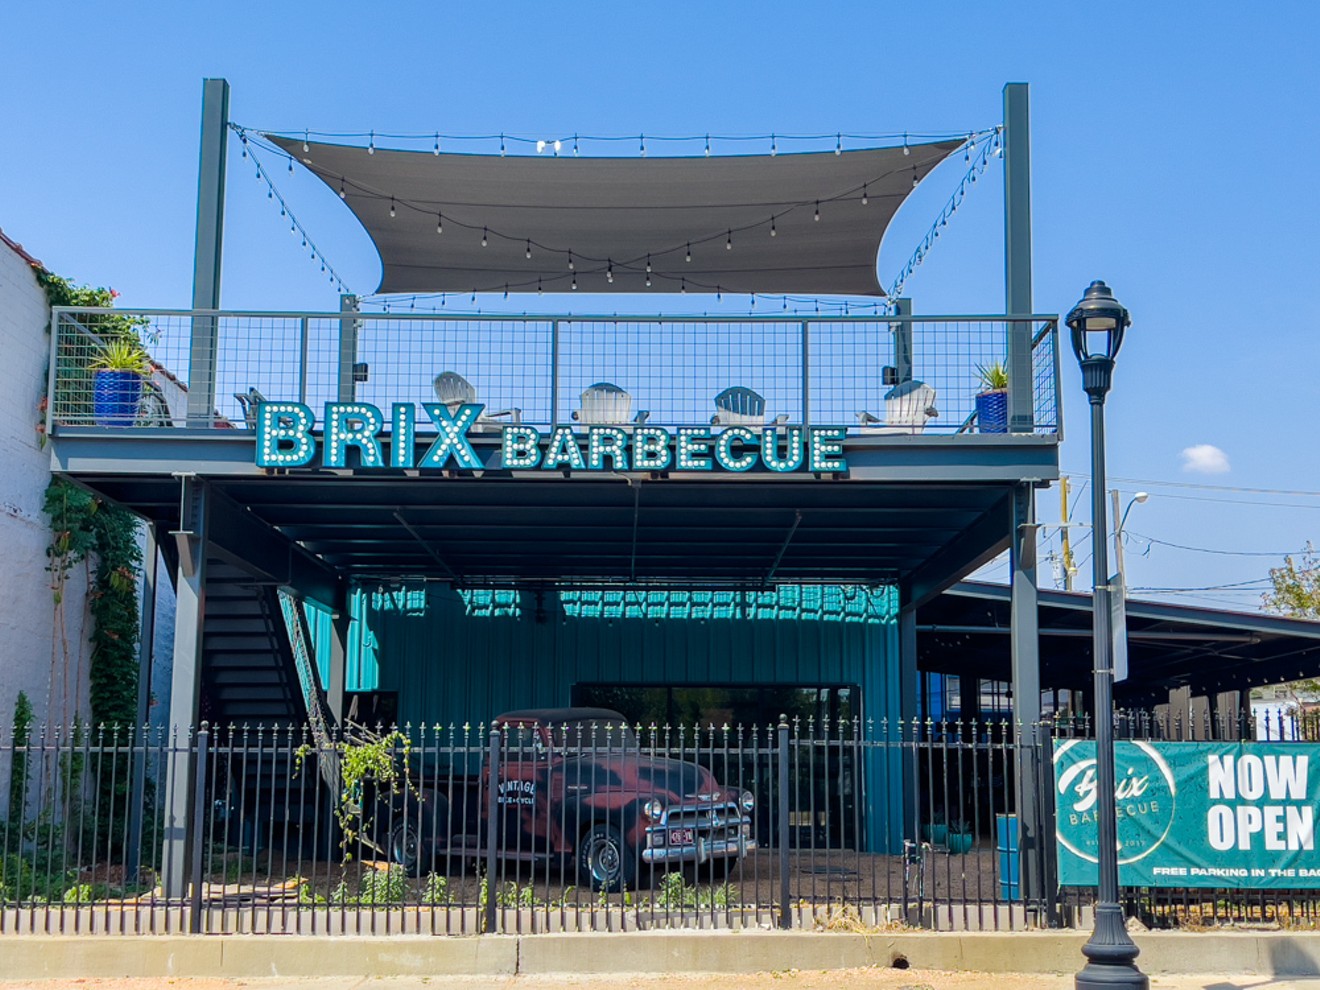 Brix Barbecue has a new brick and mortar in Fort Worth, and it's worth the drive for a visit.